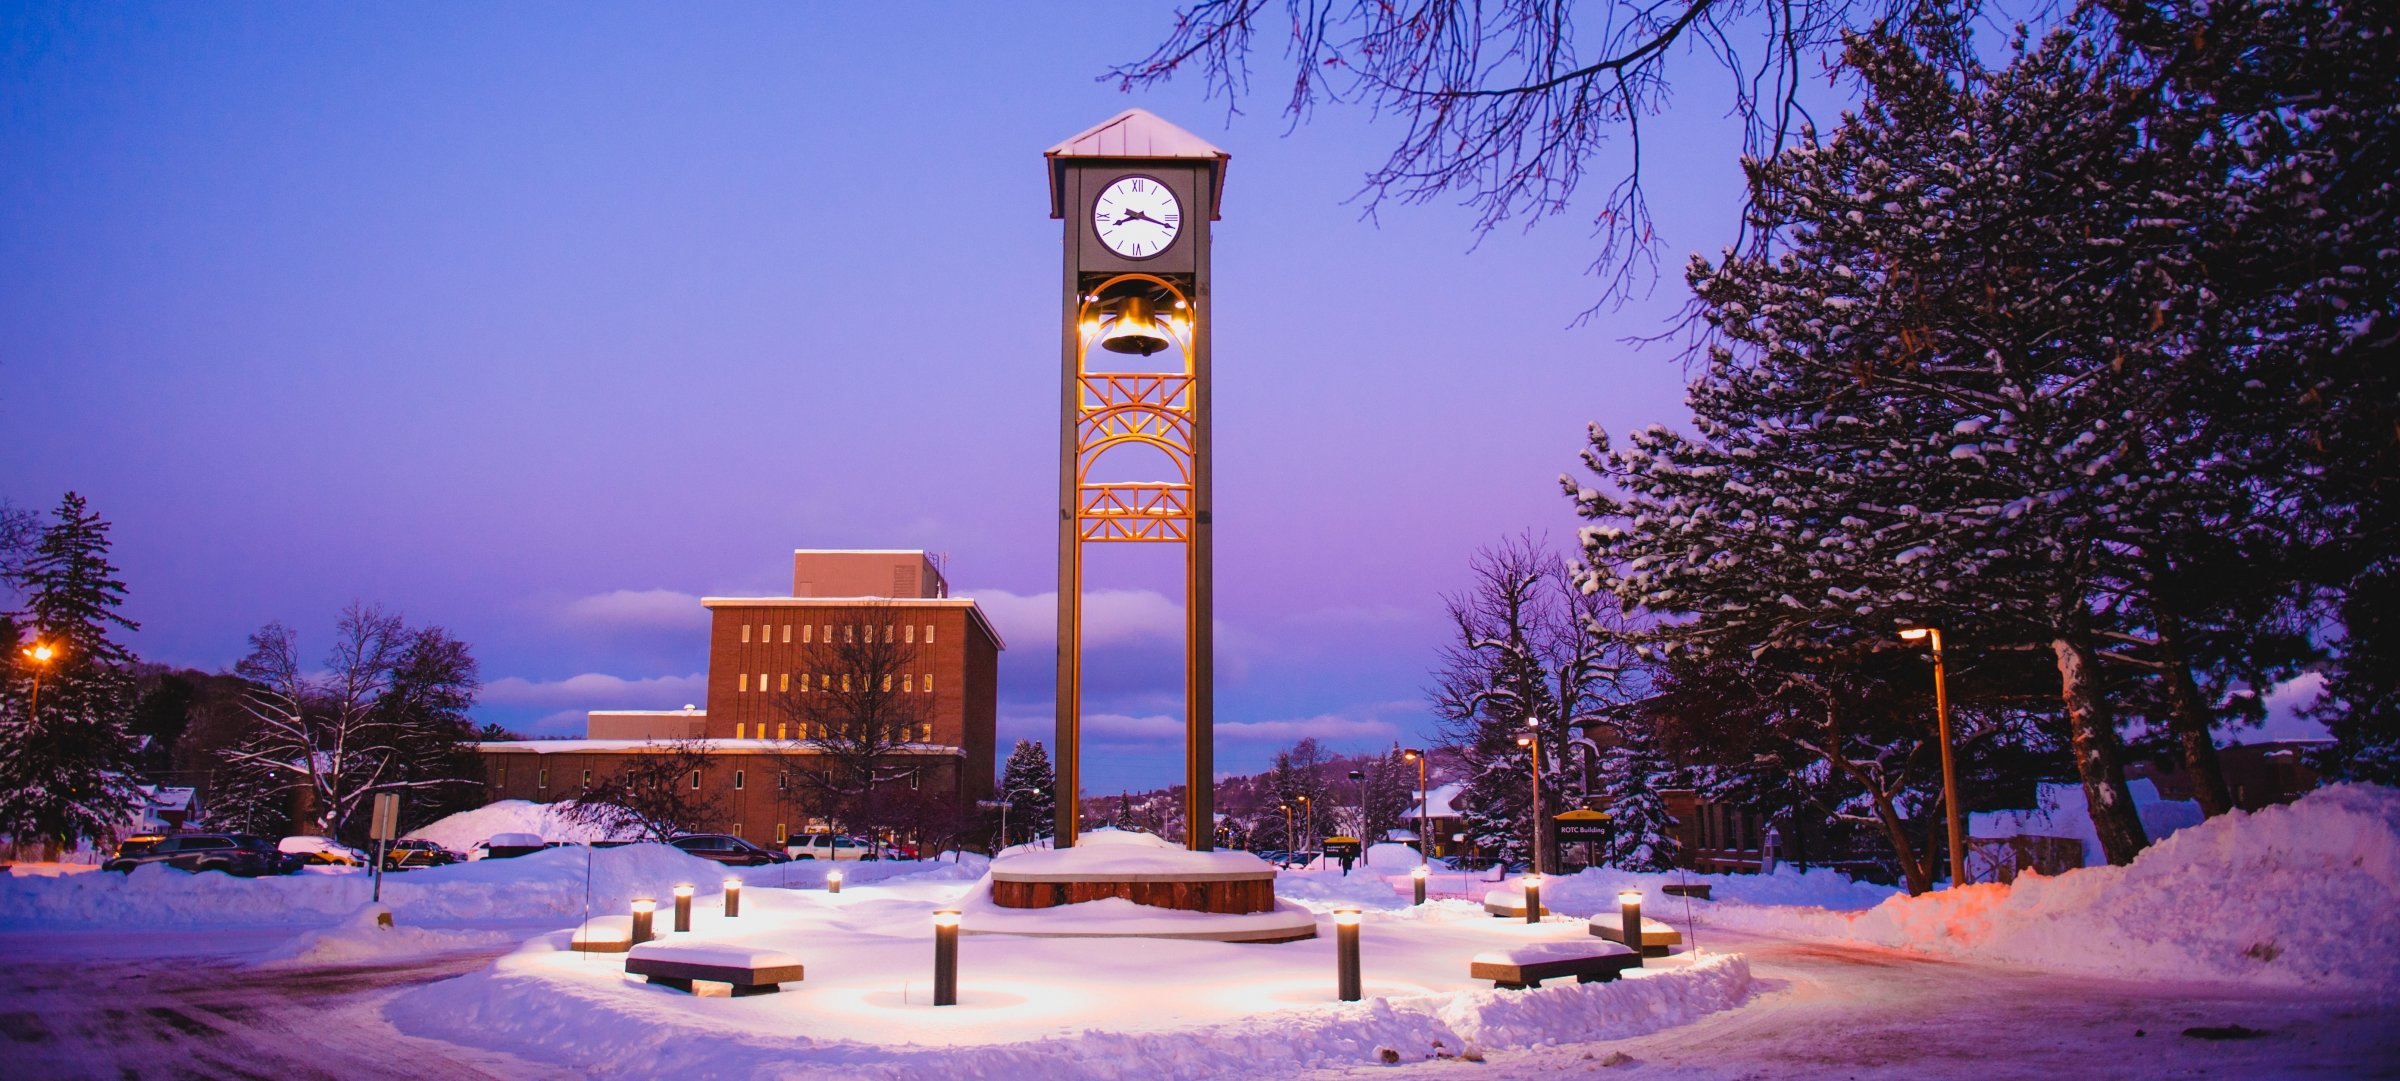 Clock tower on MTU campus in the winter